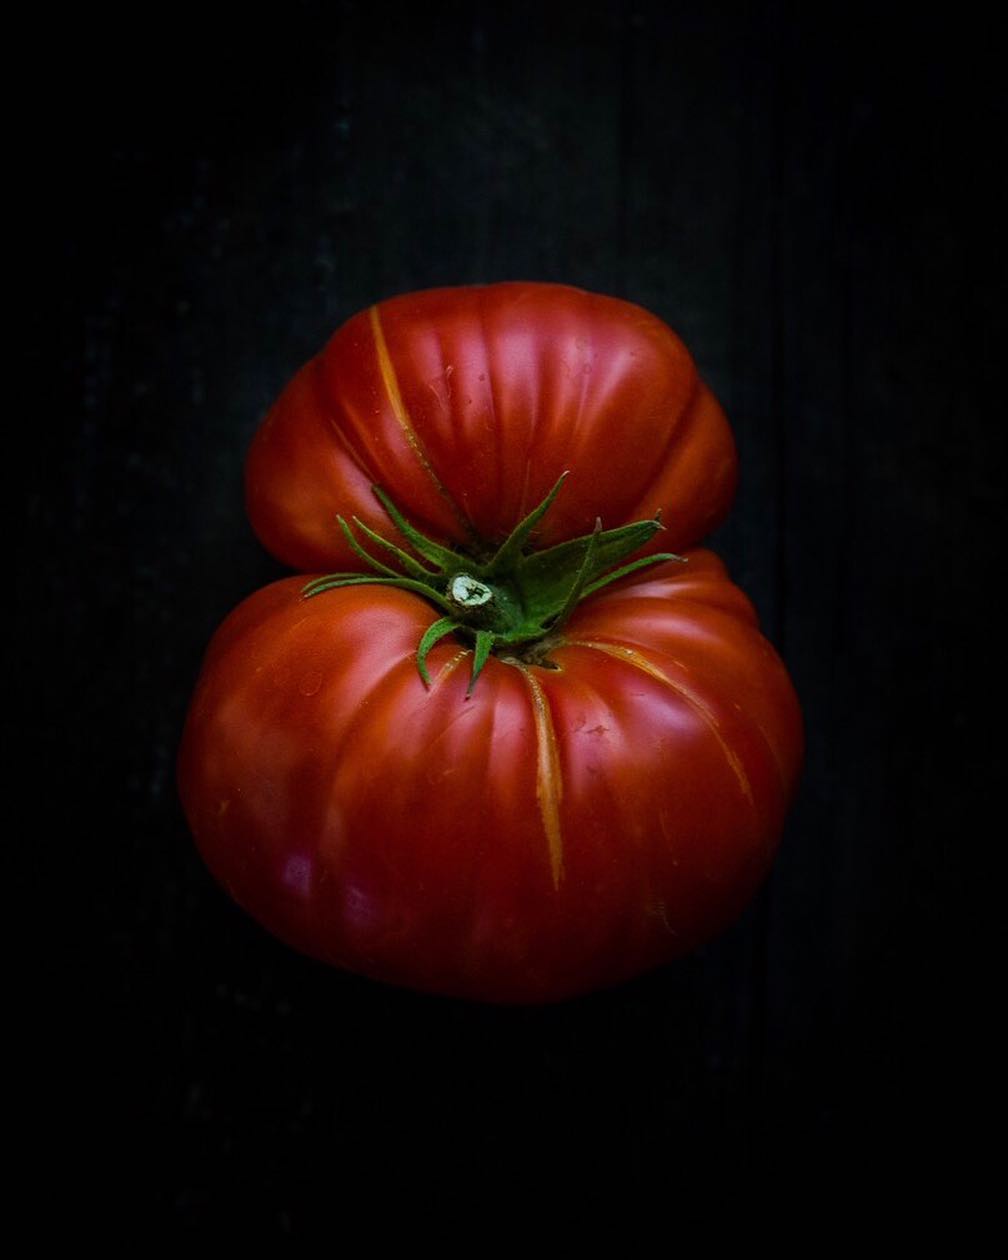 Portrait of a sultry tomato